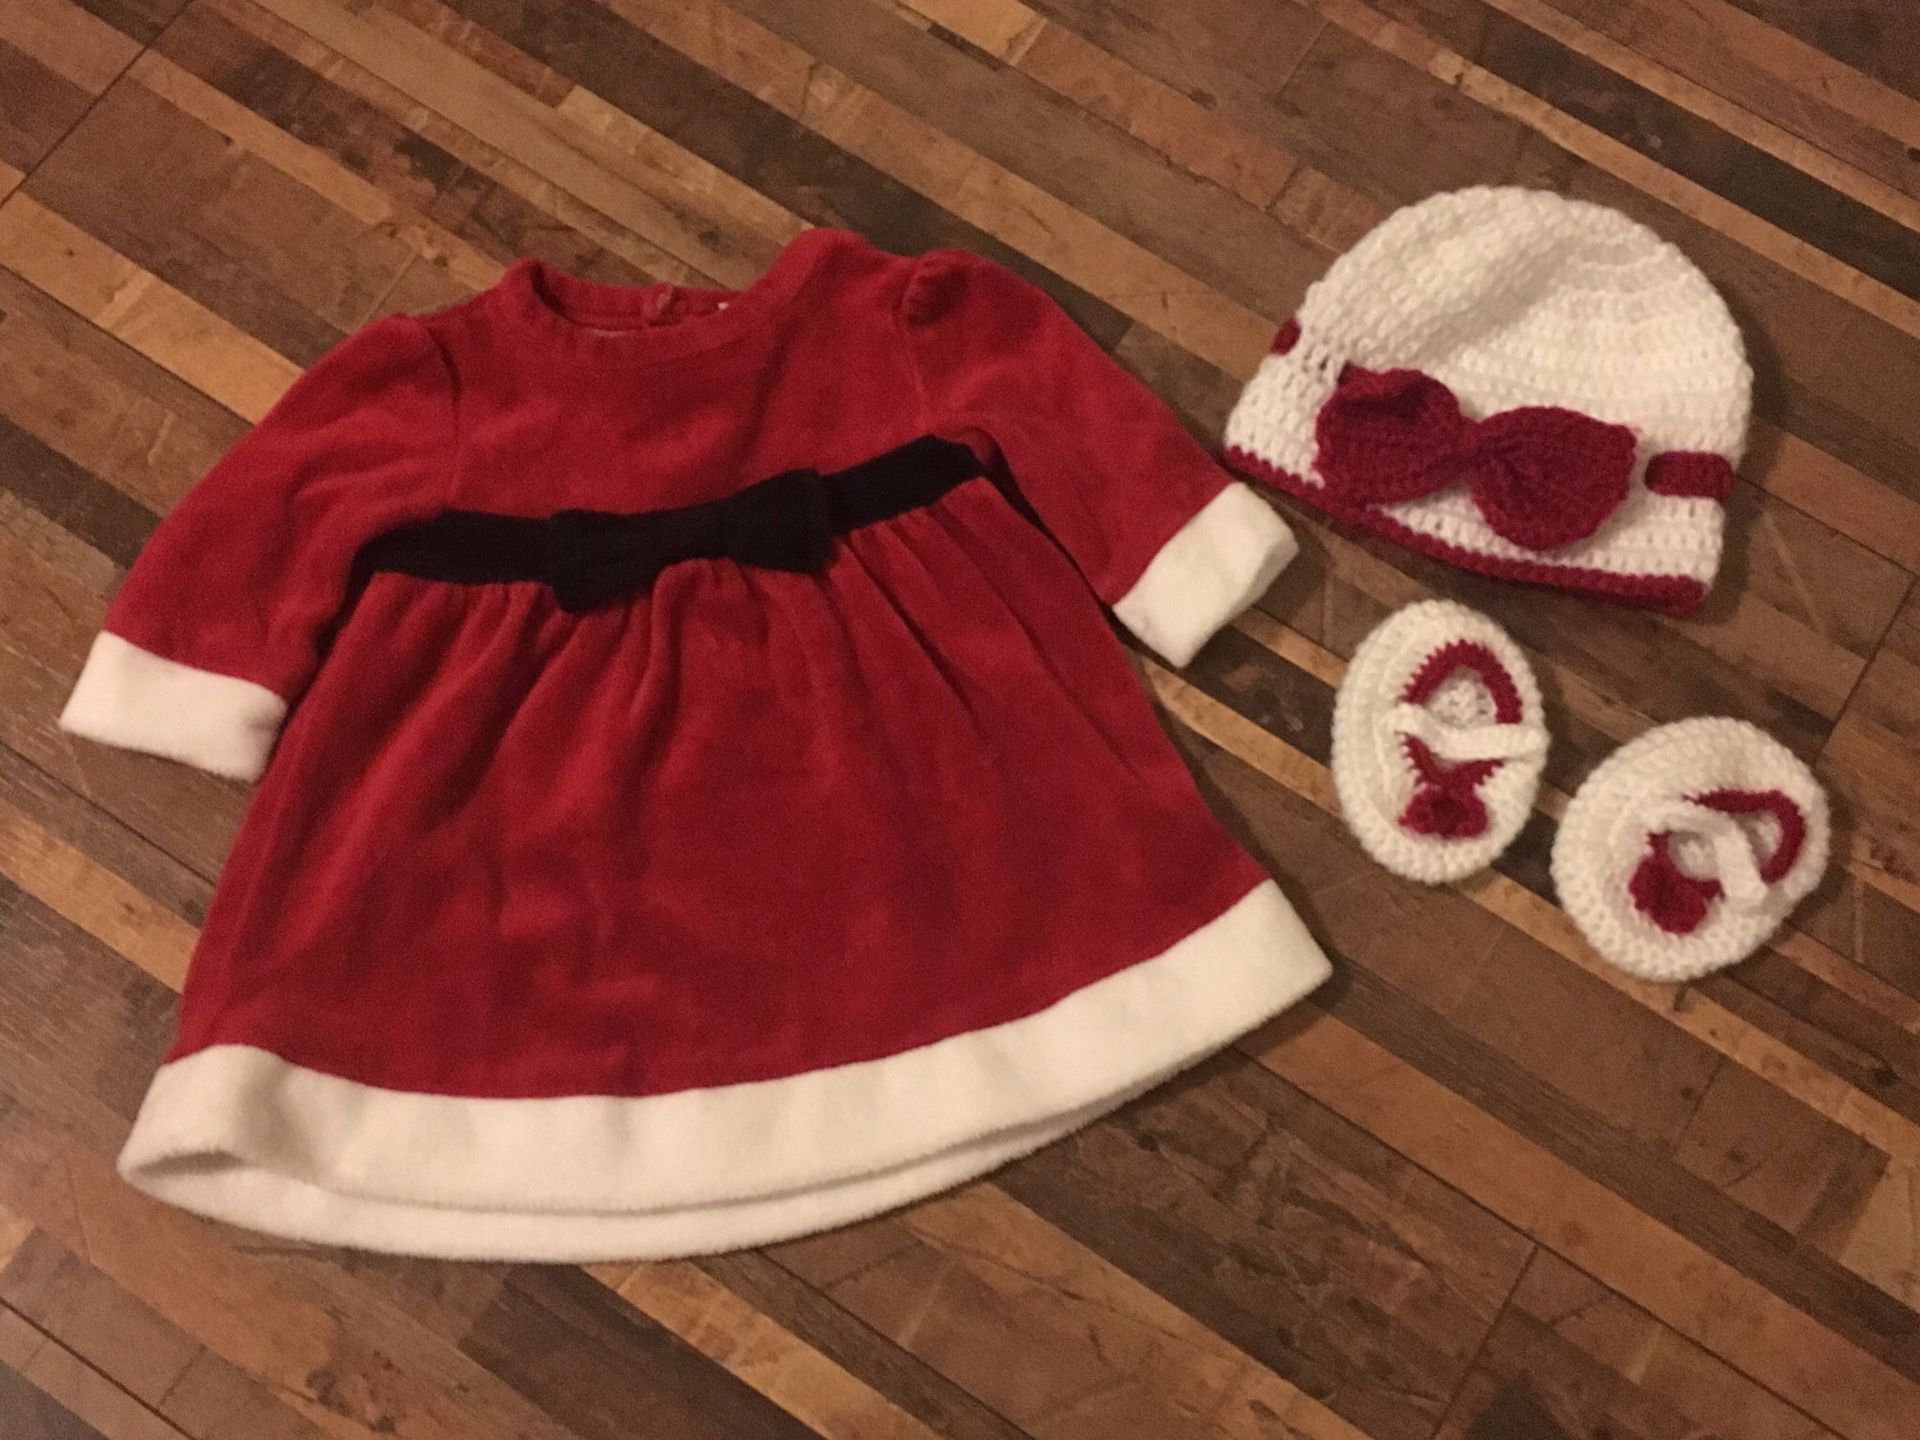 Infant Christmas dress, hat & booties